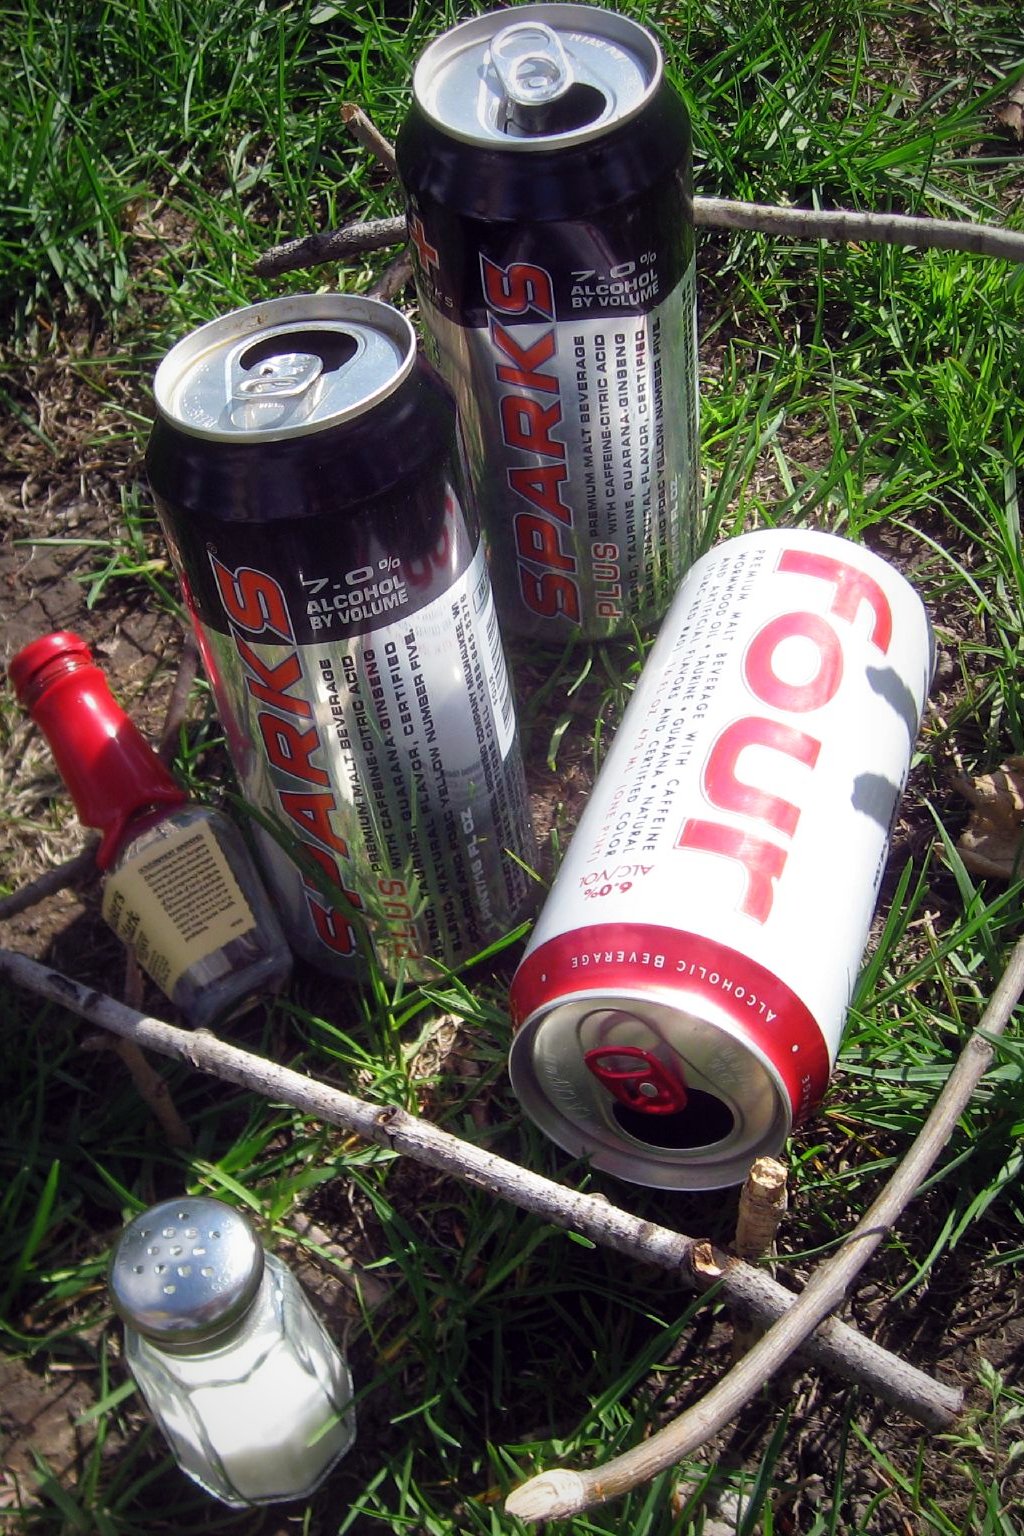 an assortment of cans and cans on the ground